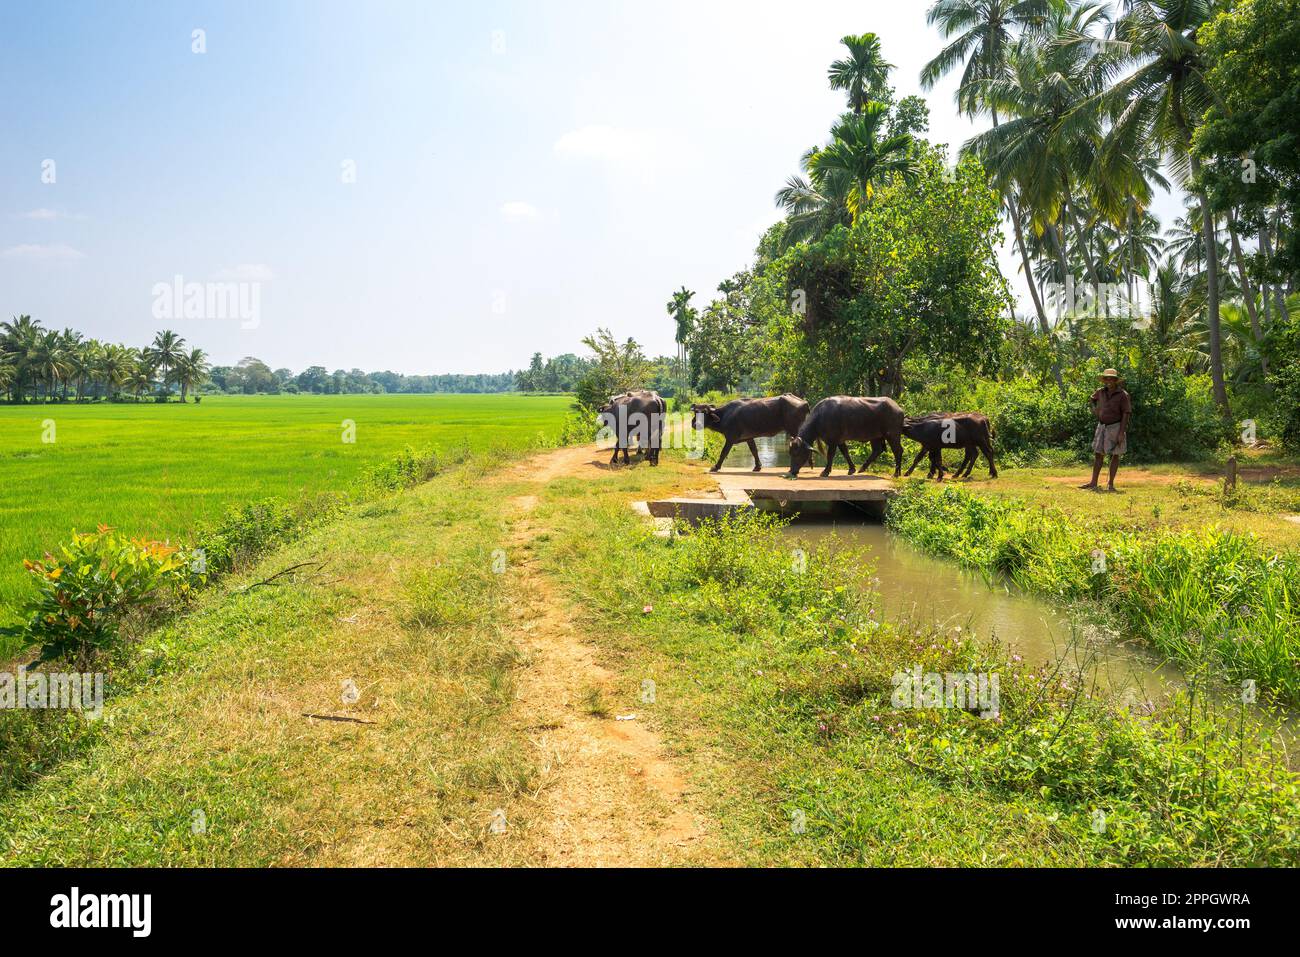 Agriculture, farming and livestock breeding in the south of Sri Lanka Stock Photo